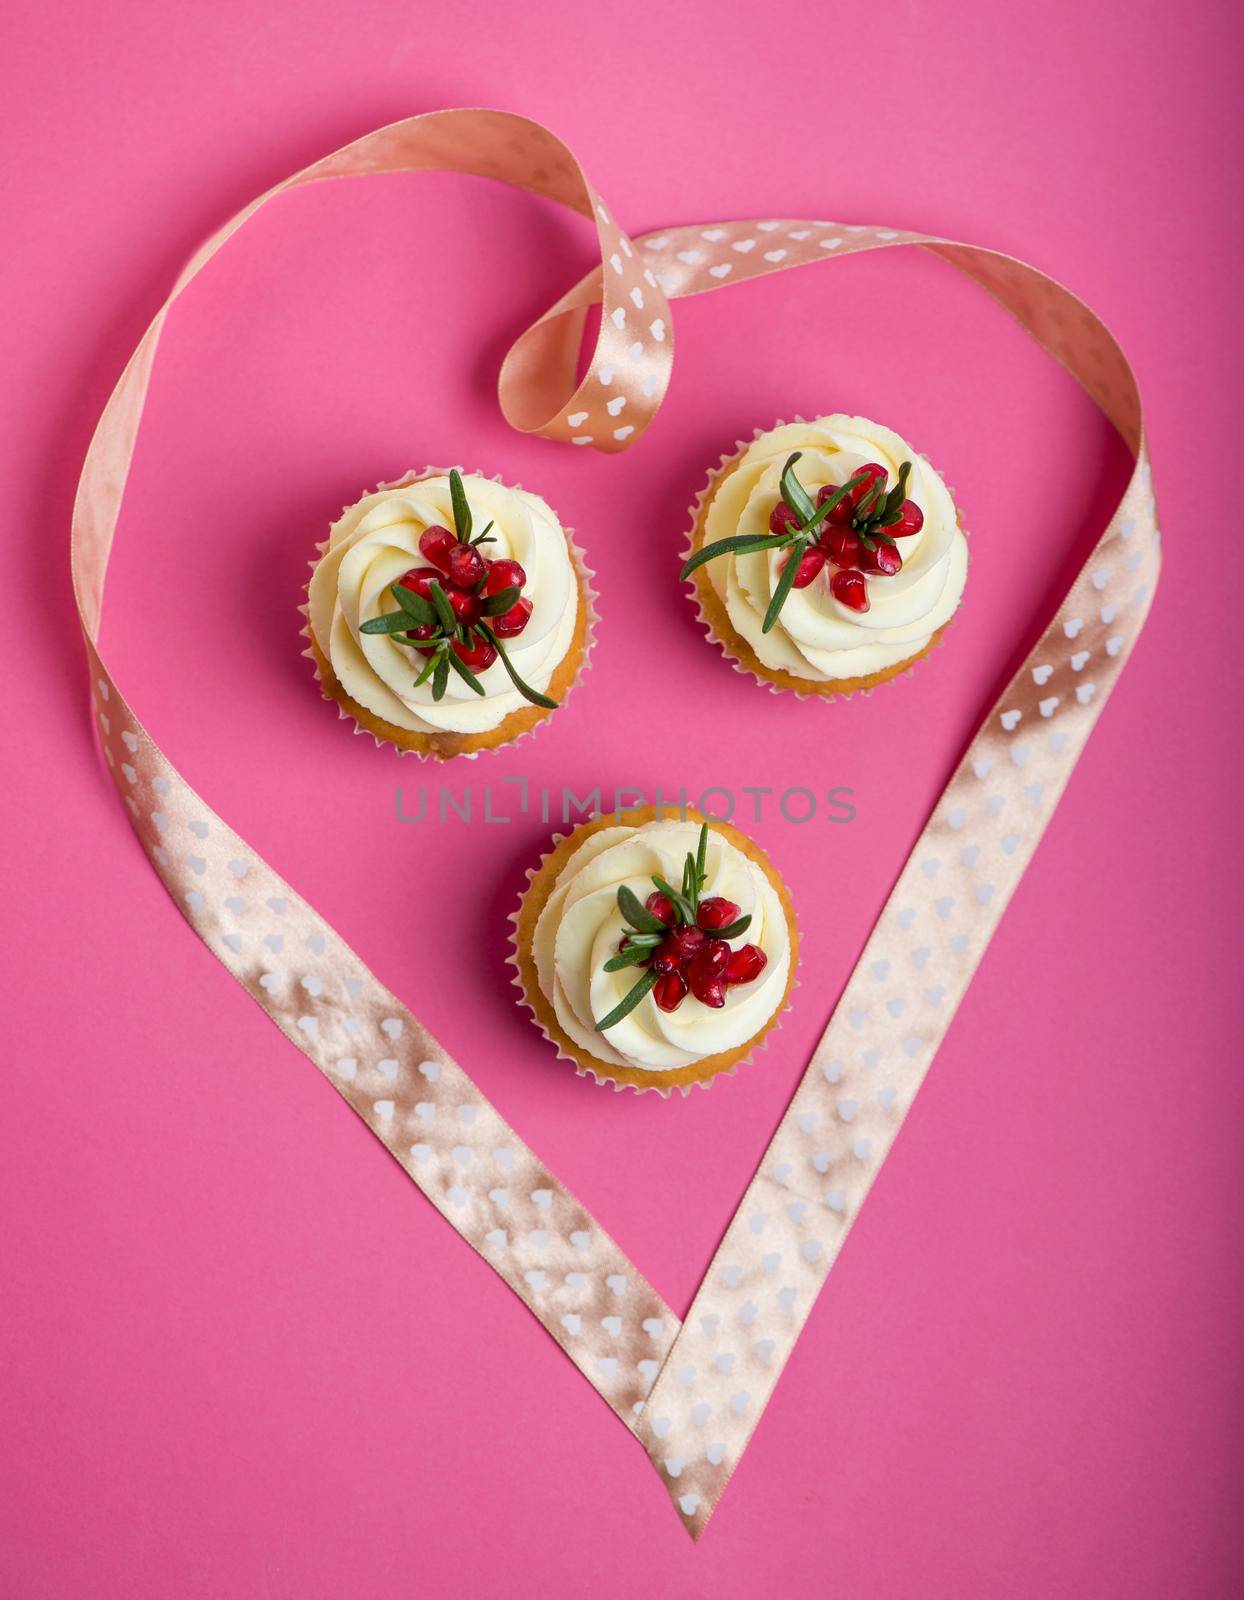 Valentines cupcakes with vanilla icing and decorated with ribbon heart.